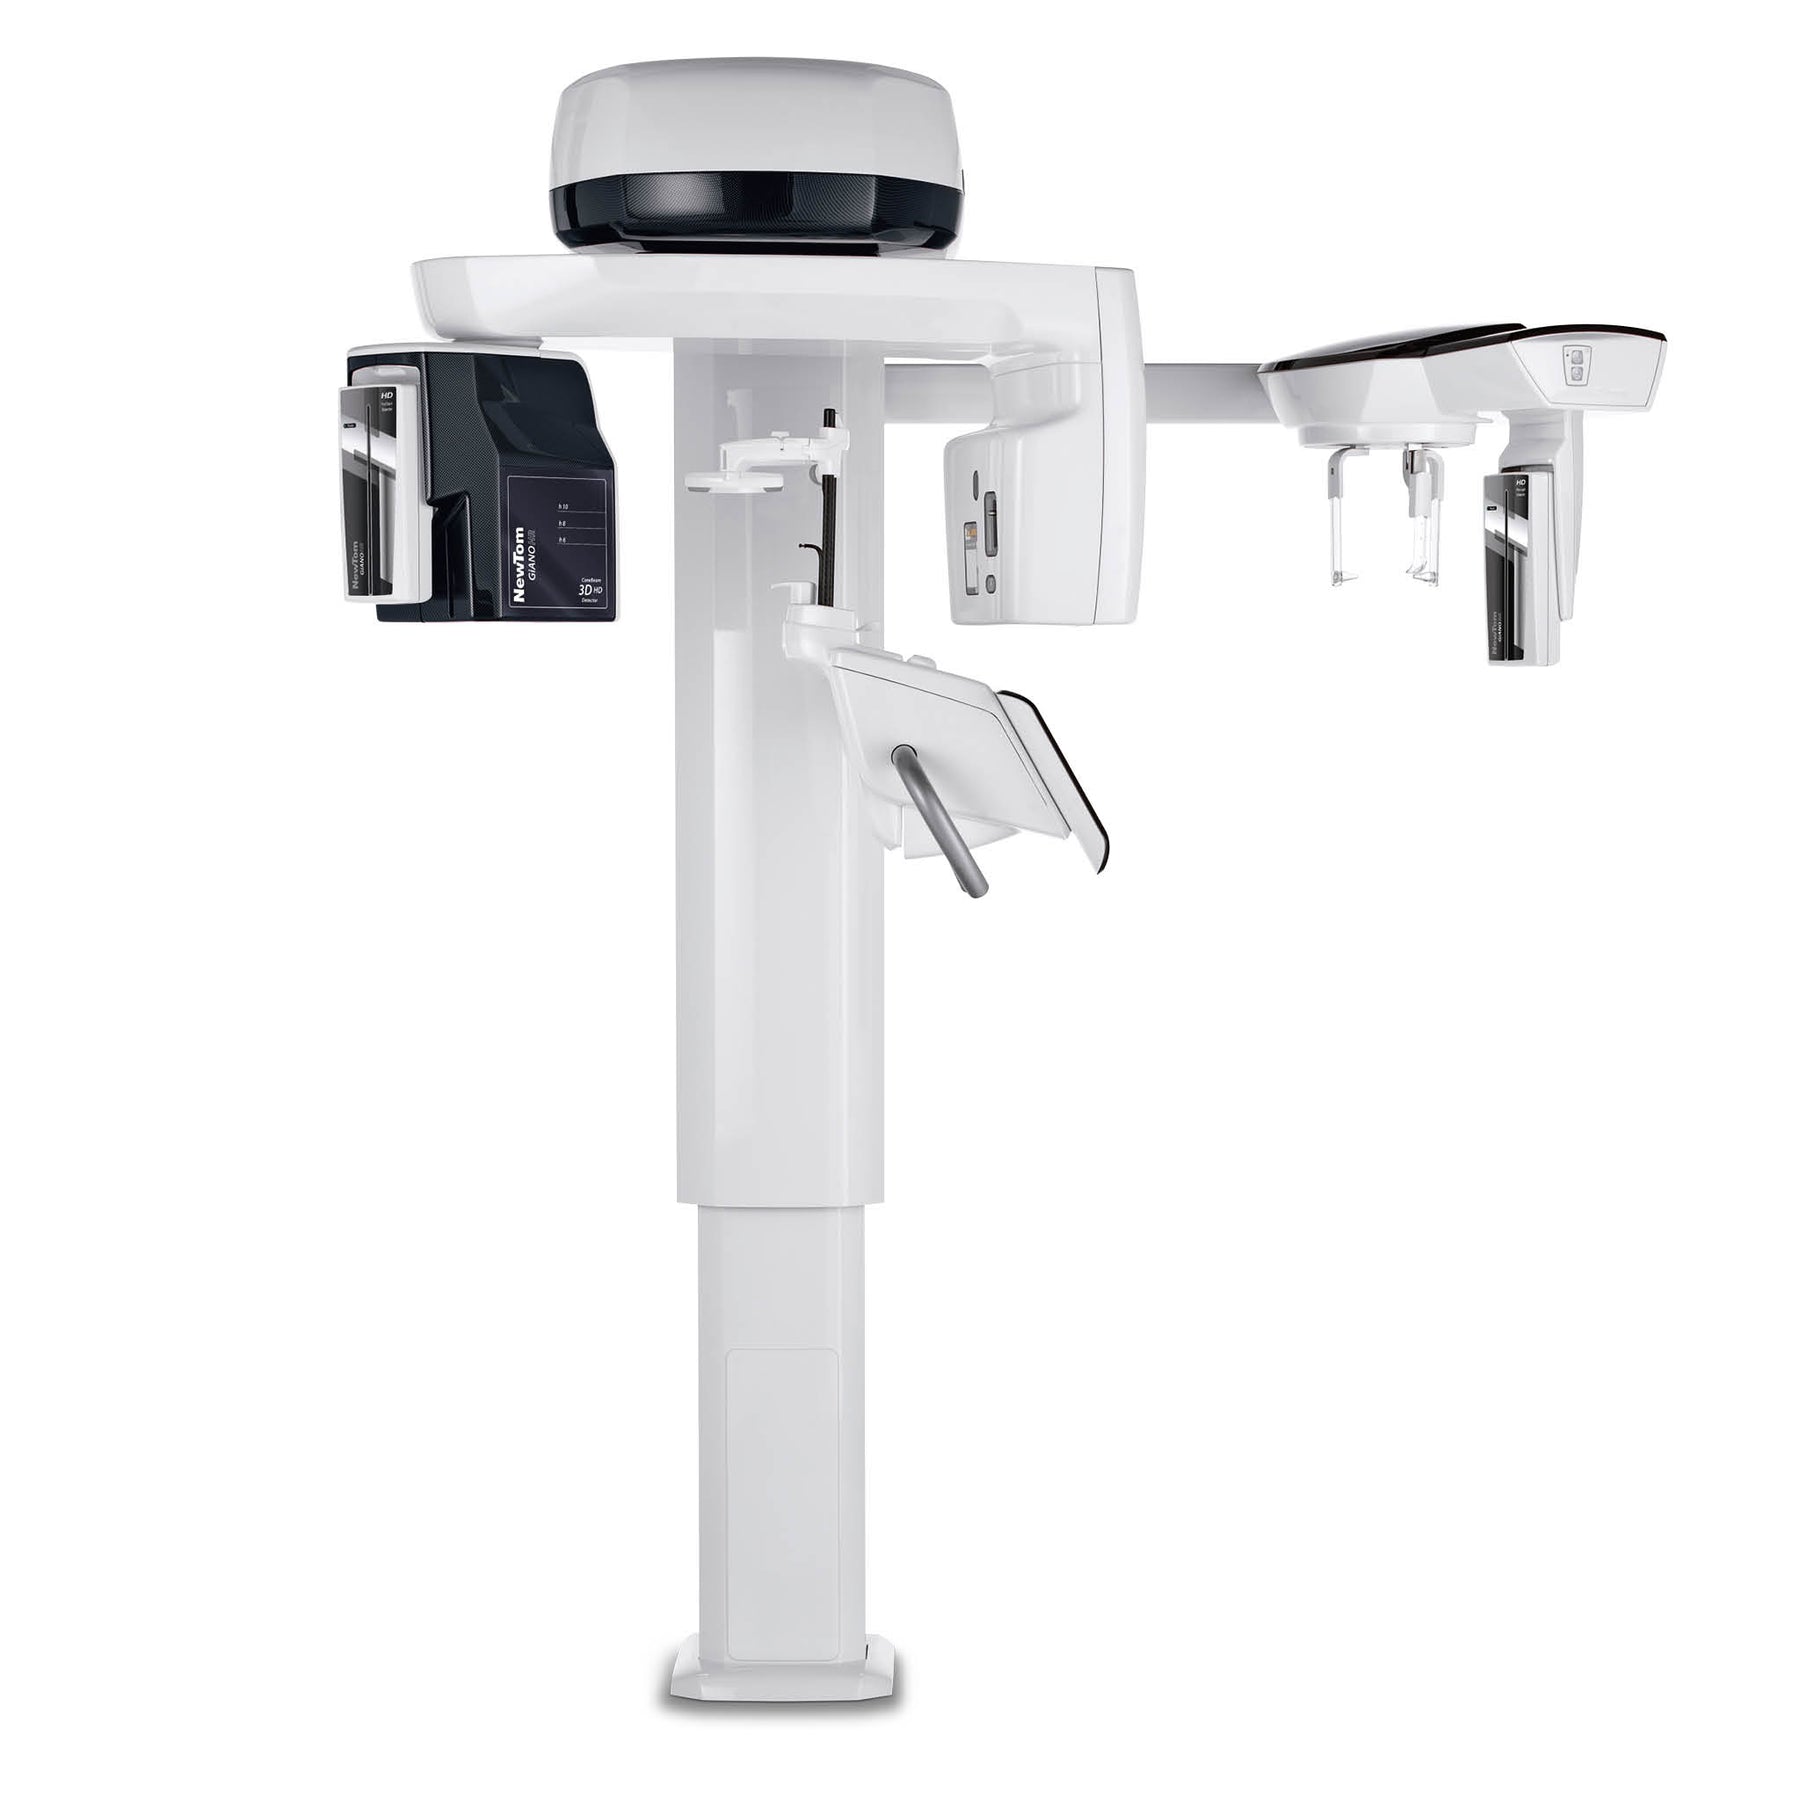 The GiANO HR is the complete hybrid CBCT for 2D/3D imaging. The device is available in three configurations that make it the ideal choice for several specialist needs.